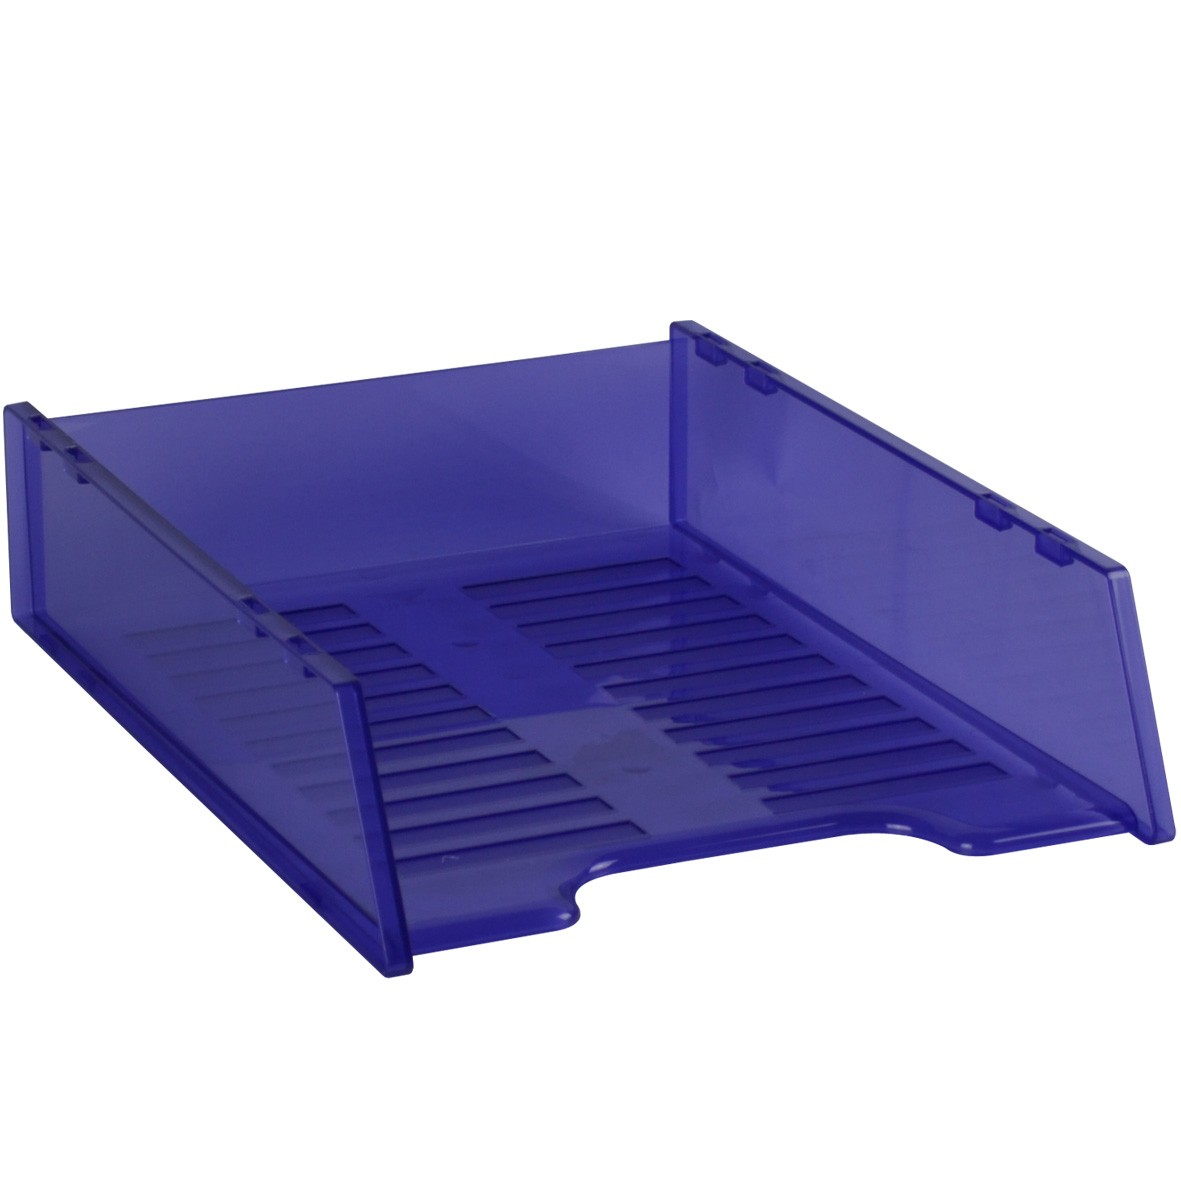 DOCUMENT TRAY STACKABLE TINTED PURPLE #I-60PR 